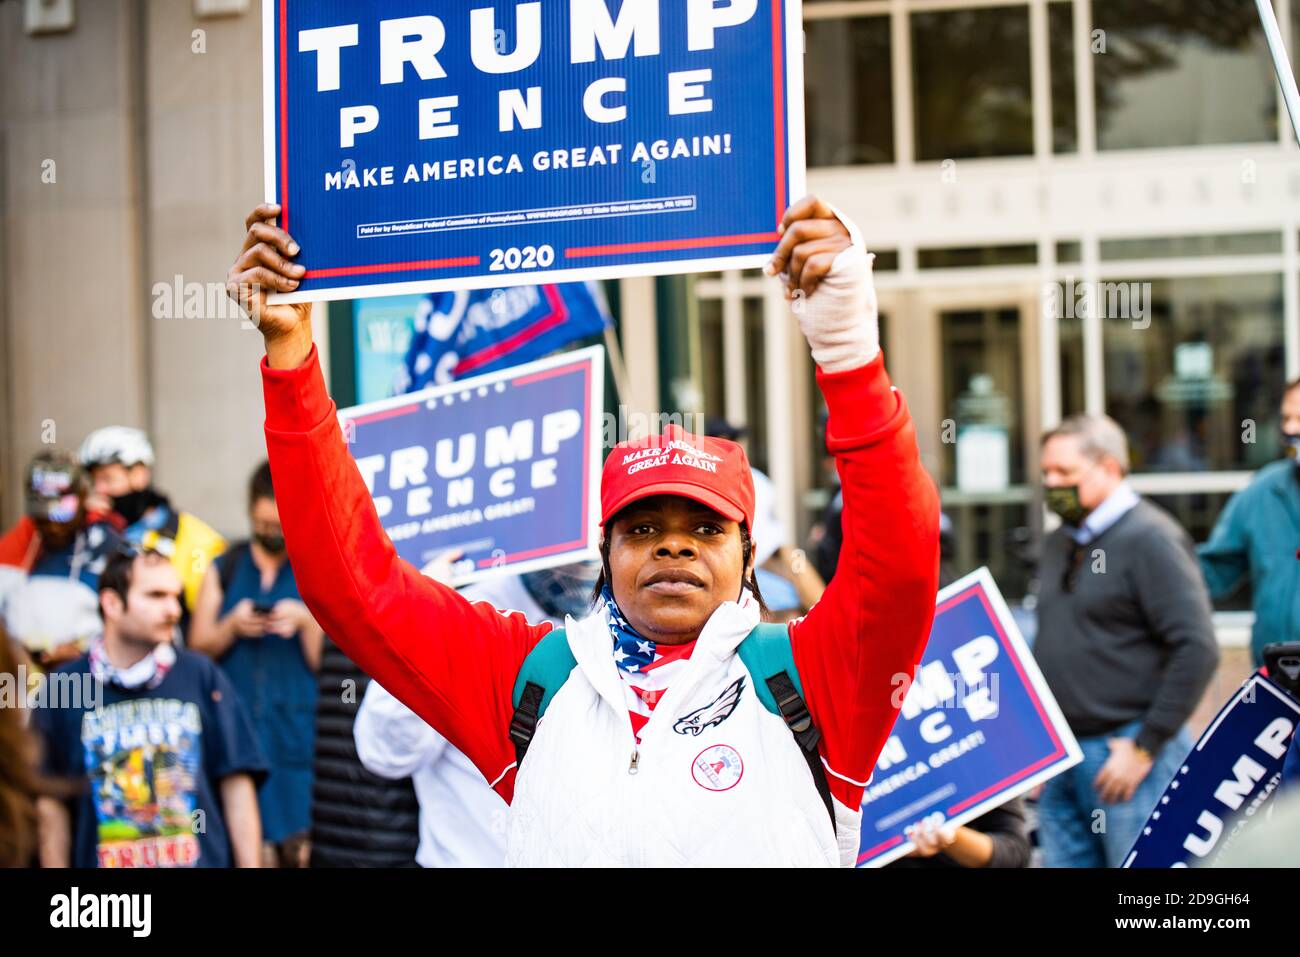 Philadelphia, USA. 5th November, 2020. A pro-Trump protester at the Philadelphia Convention Center. Two days after the Presidential election, Donald Trump sued several states to stop counting legally cast ballots in States that lean towards Joe Biden. Credit: Chris Baker Evens. Stock Photo